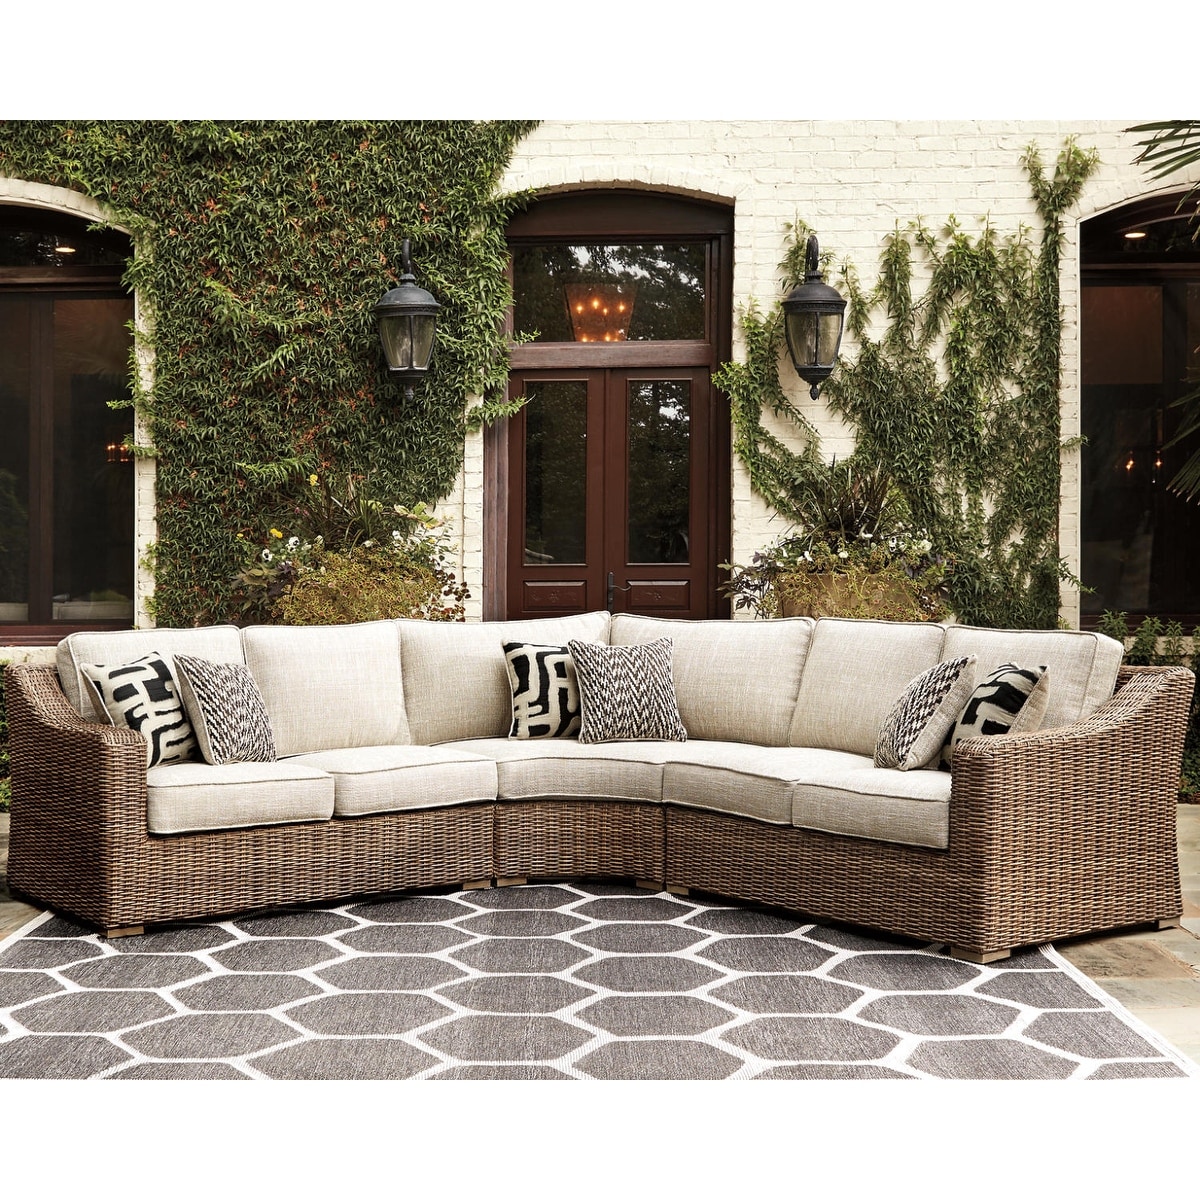 Signature Design by Ashley Beachcroft Beige Outdoor Sectional - On Sale ...